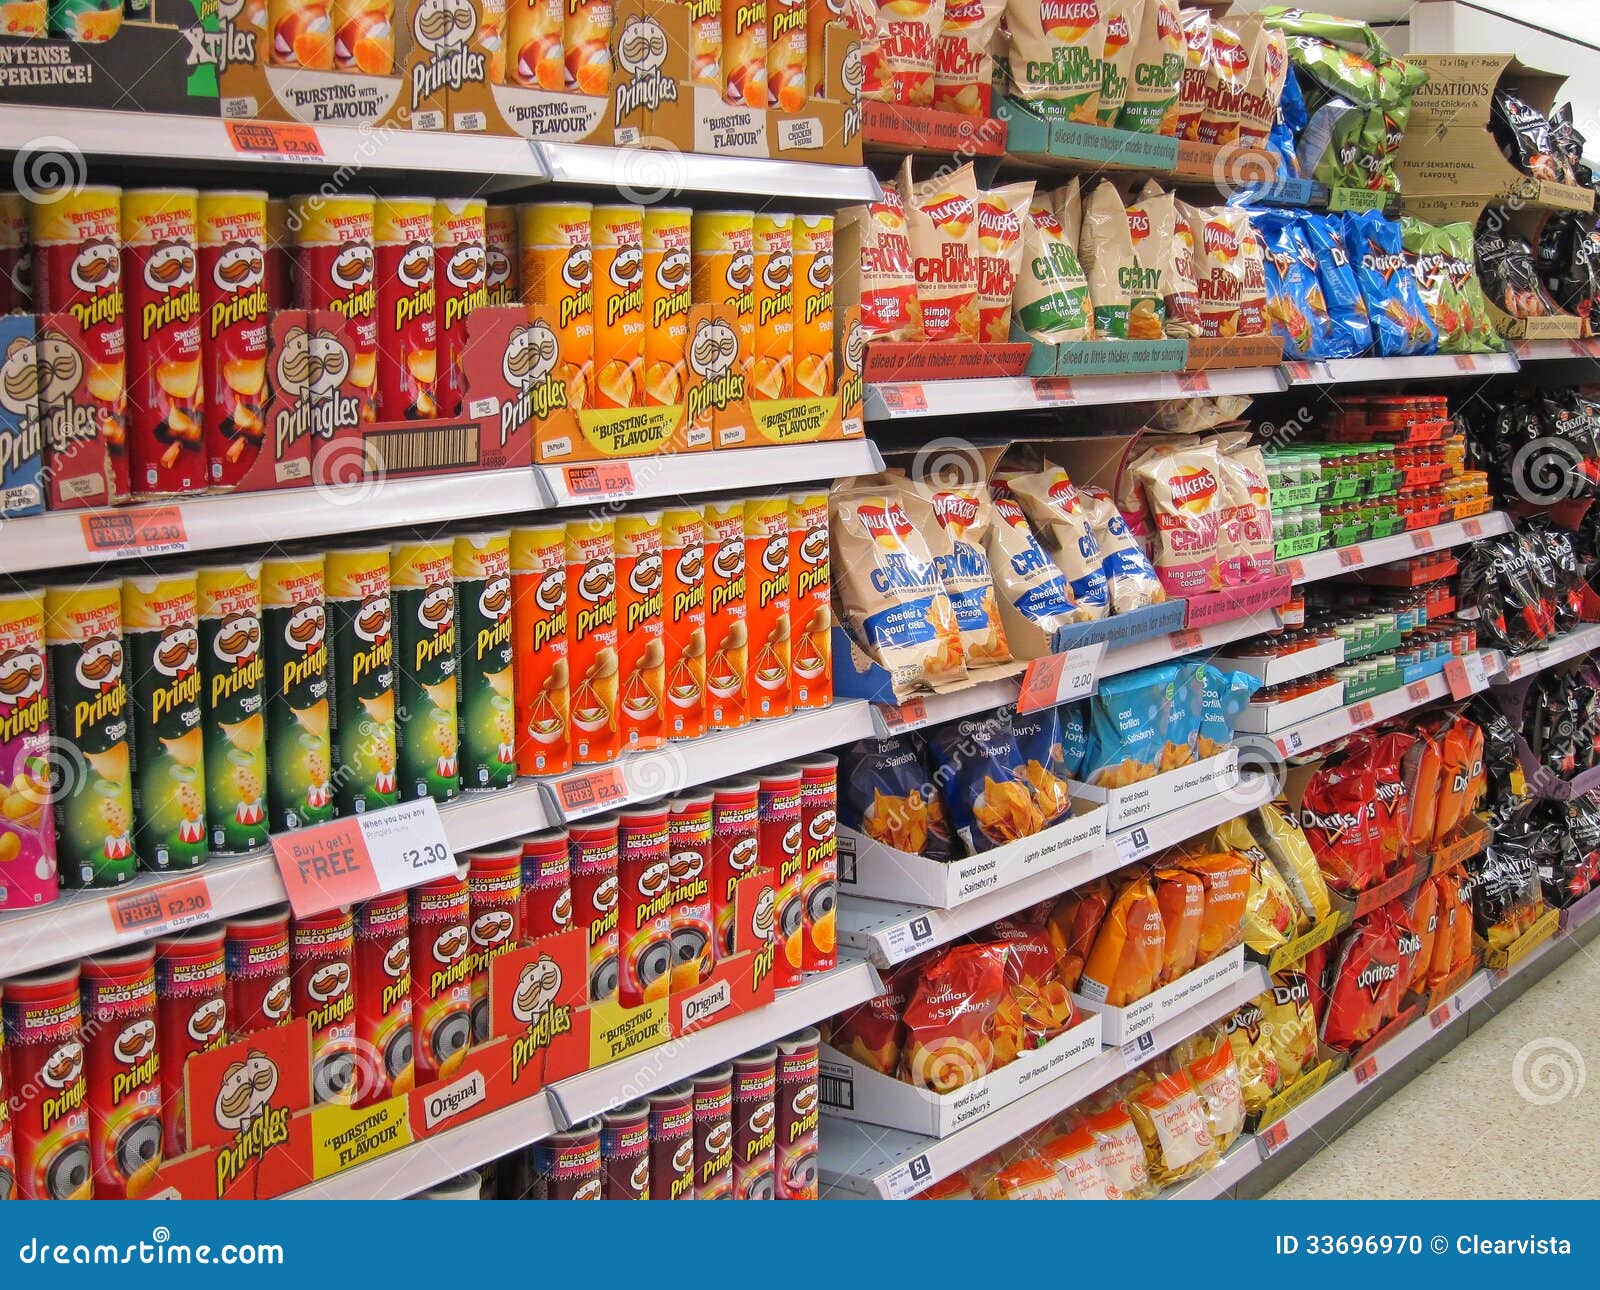 Potato Chips Or Crisps On A Store Shelf. Editorial Image - Image 